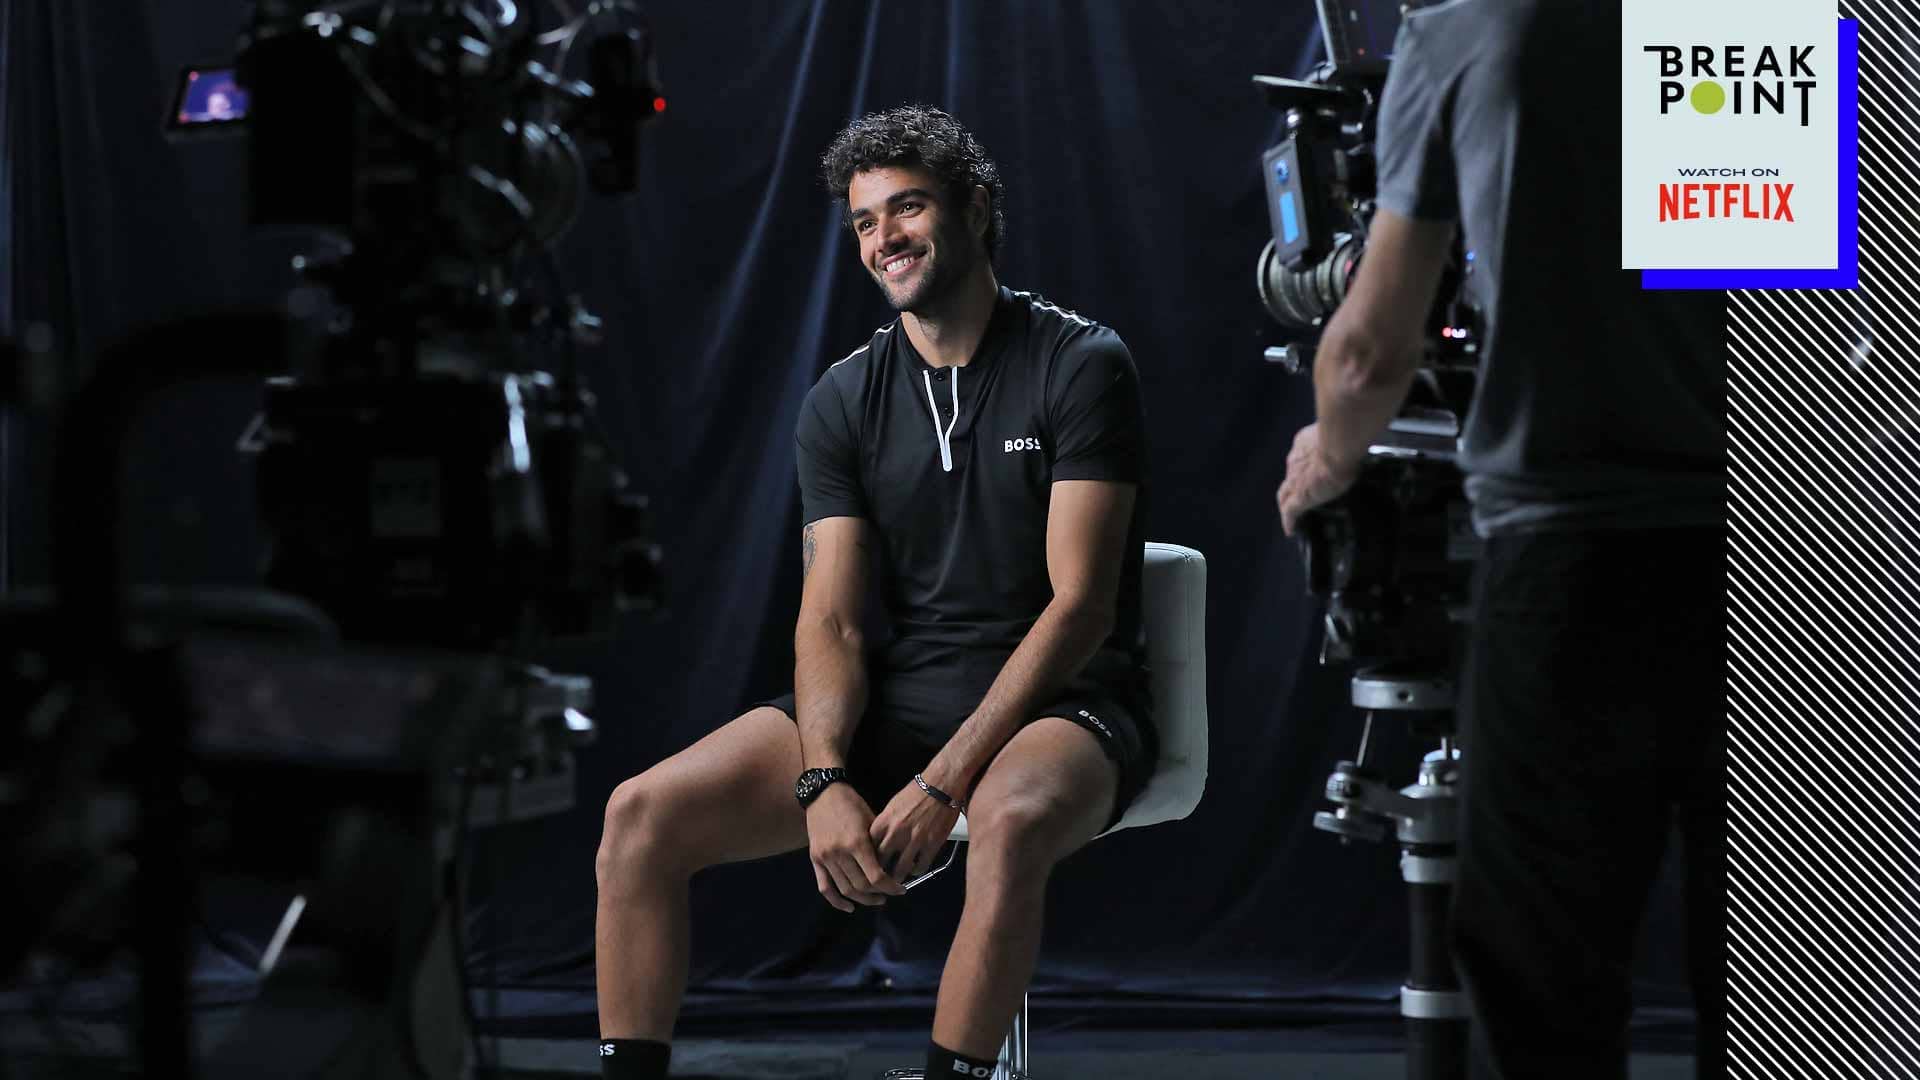 Matteo Berrettini's favourite shows include Stranger Things, Dexter and The Punisher.